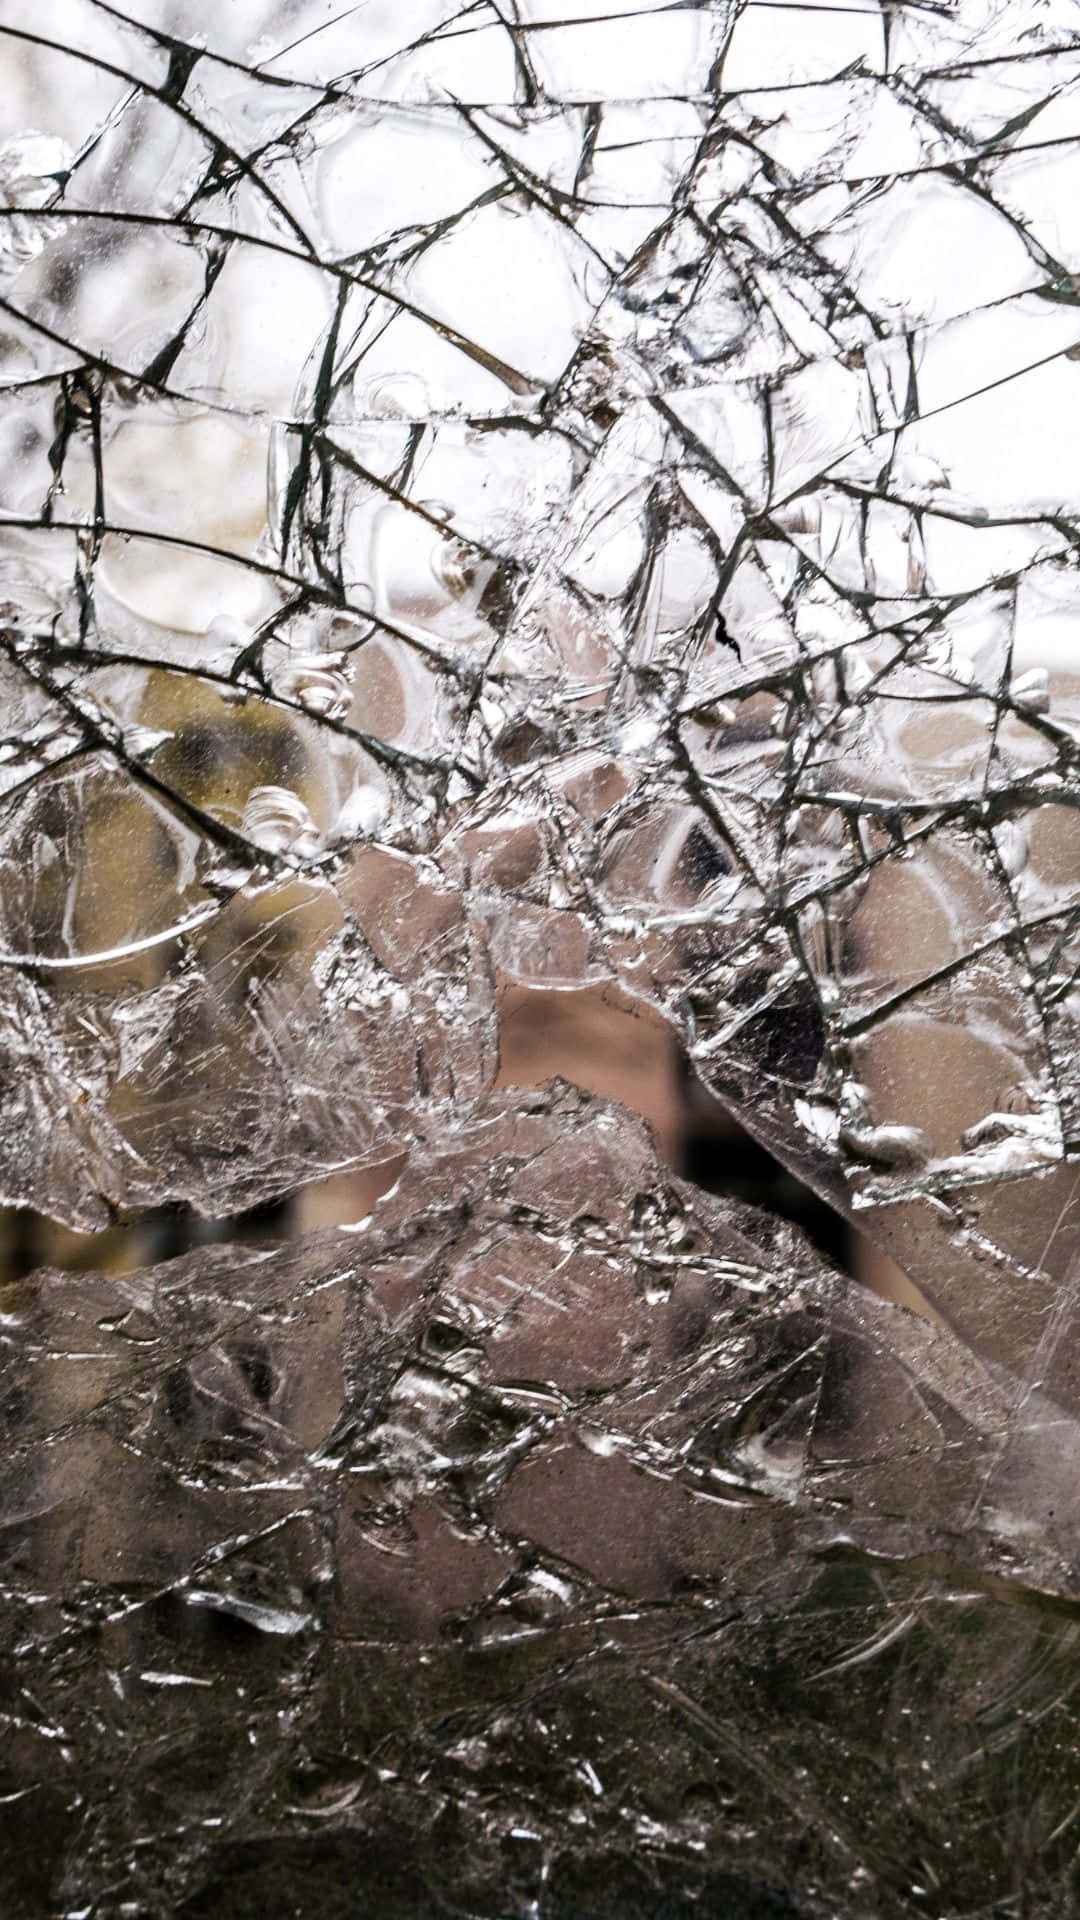 Intriguing Abstract Shattered Screen Wallpaper